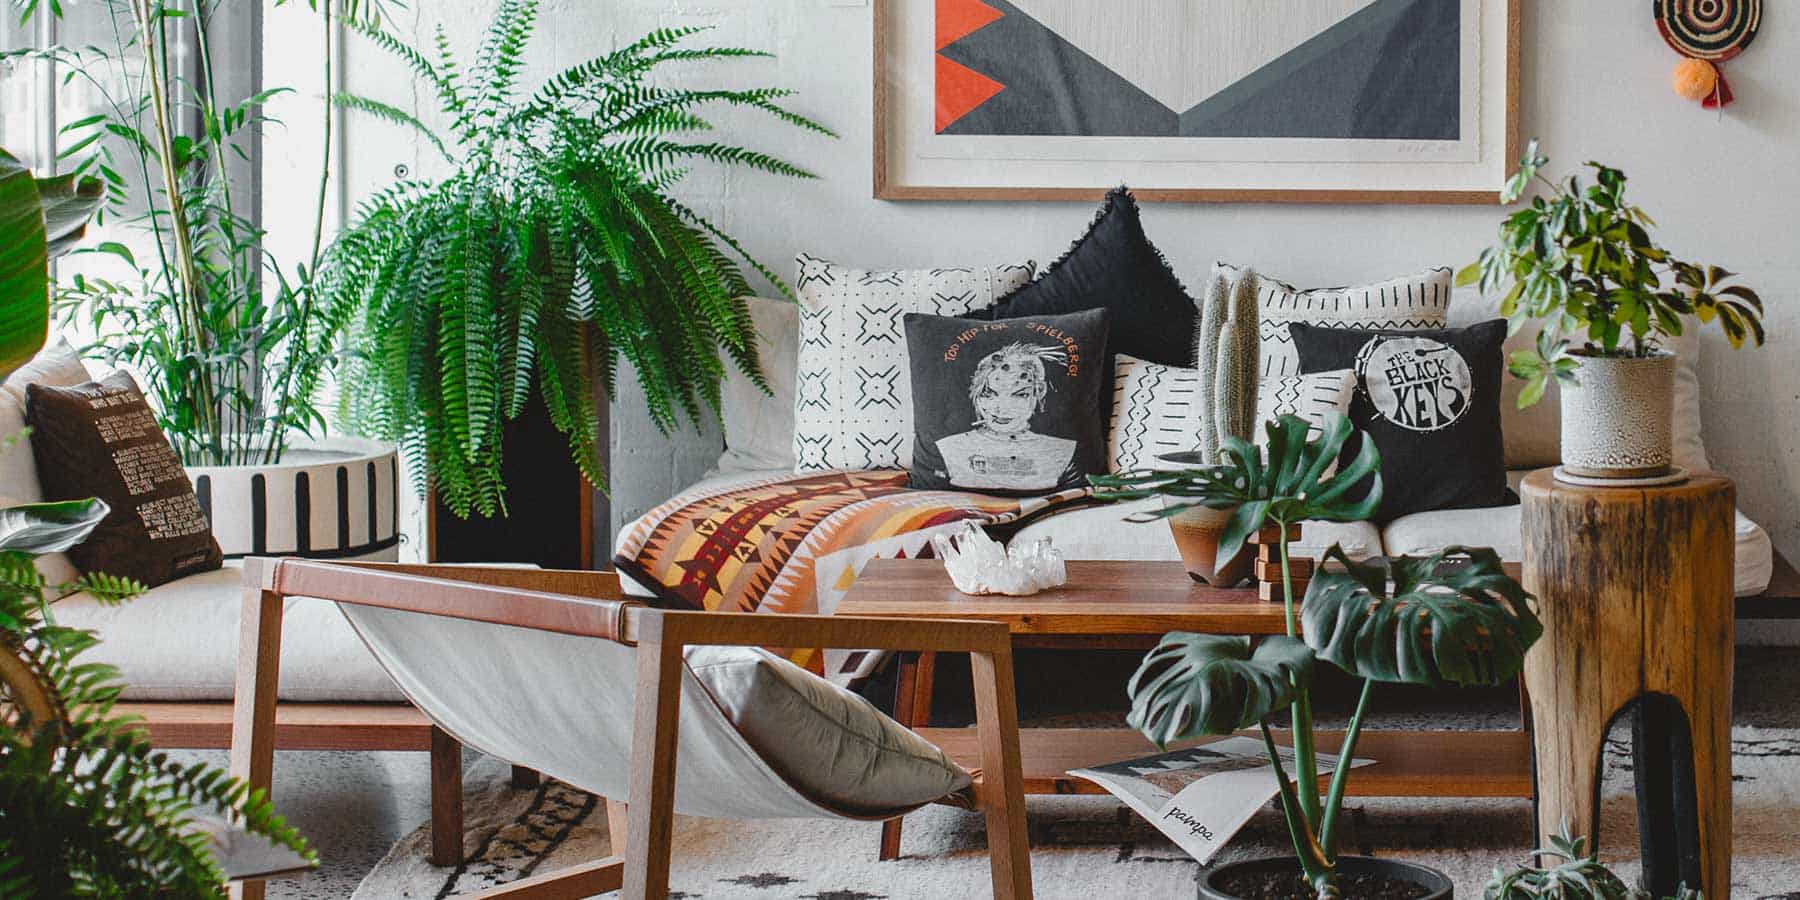 Boho Décor Ideas by RealCraft: Room decorated with multiple indoor plants